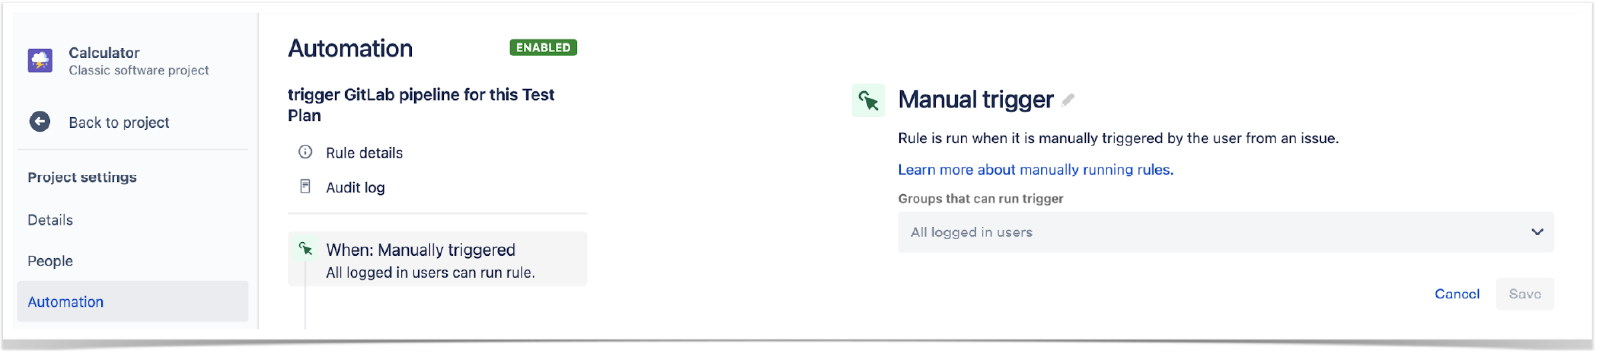 Create a new rule in Jira settings, under Automation